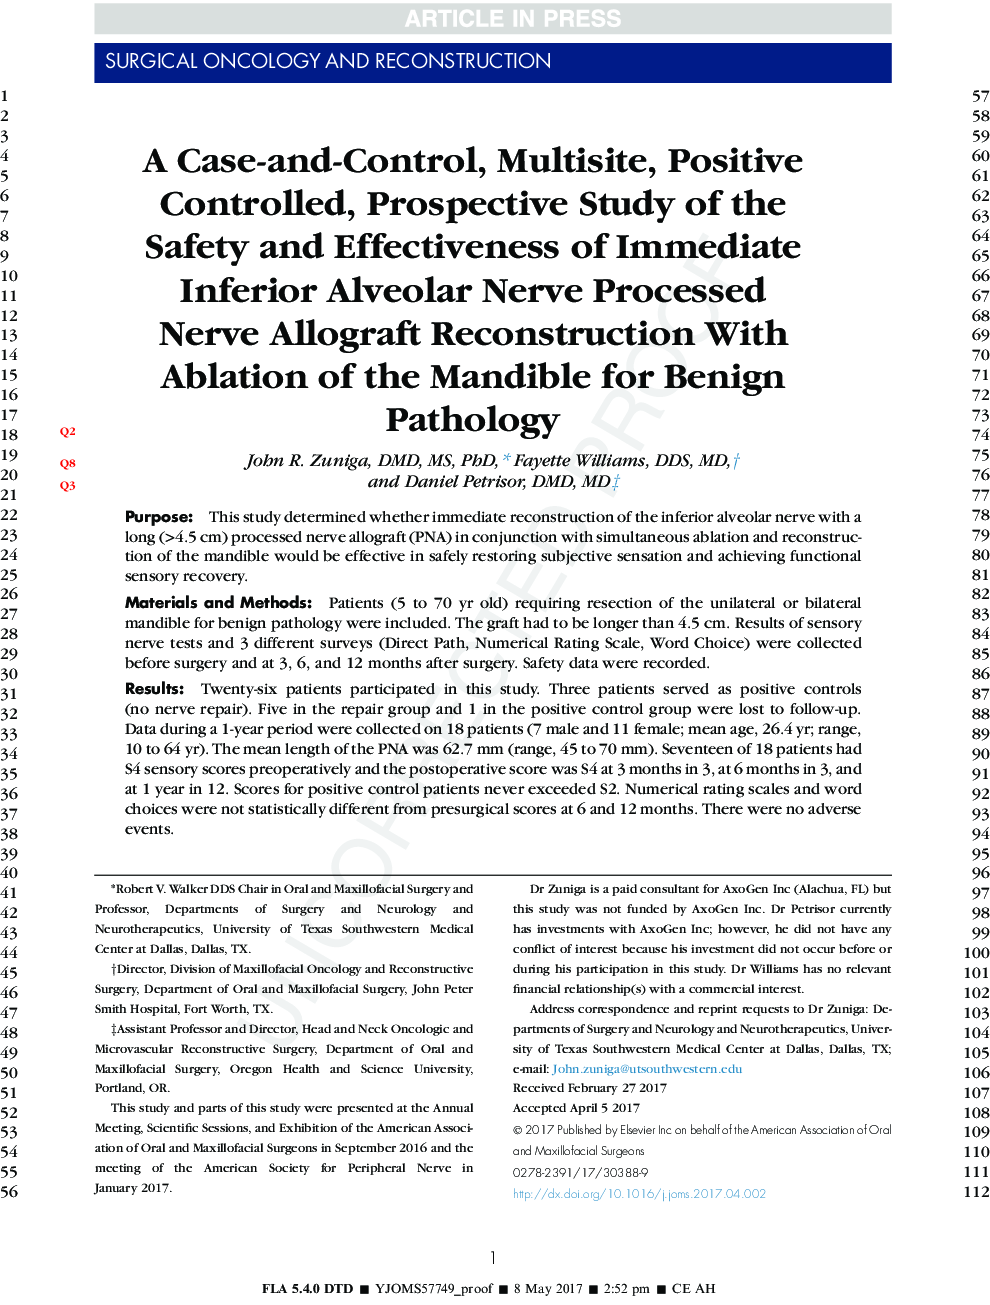 A Case-and-Control, Multisite, Positive Controlled, Prospective Study of the Safety and Effectiveness of Immediate Inferior Alveolar Nerve Processed Nerve Allograft Reconstruction With Ablation of the Mandible for Benign Pathology